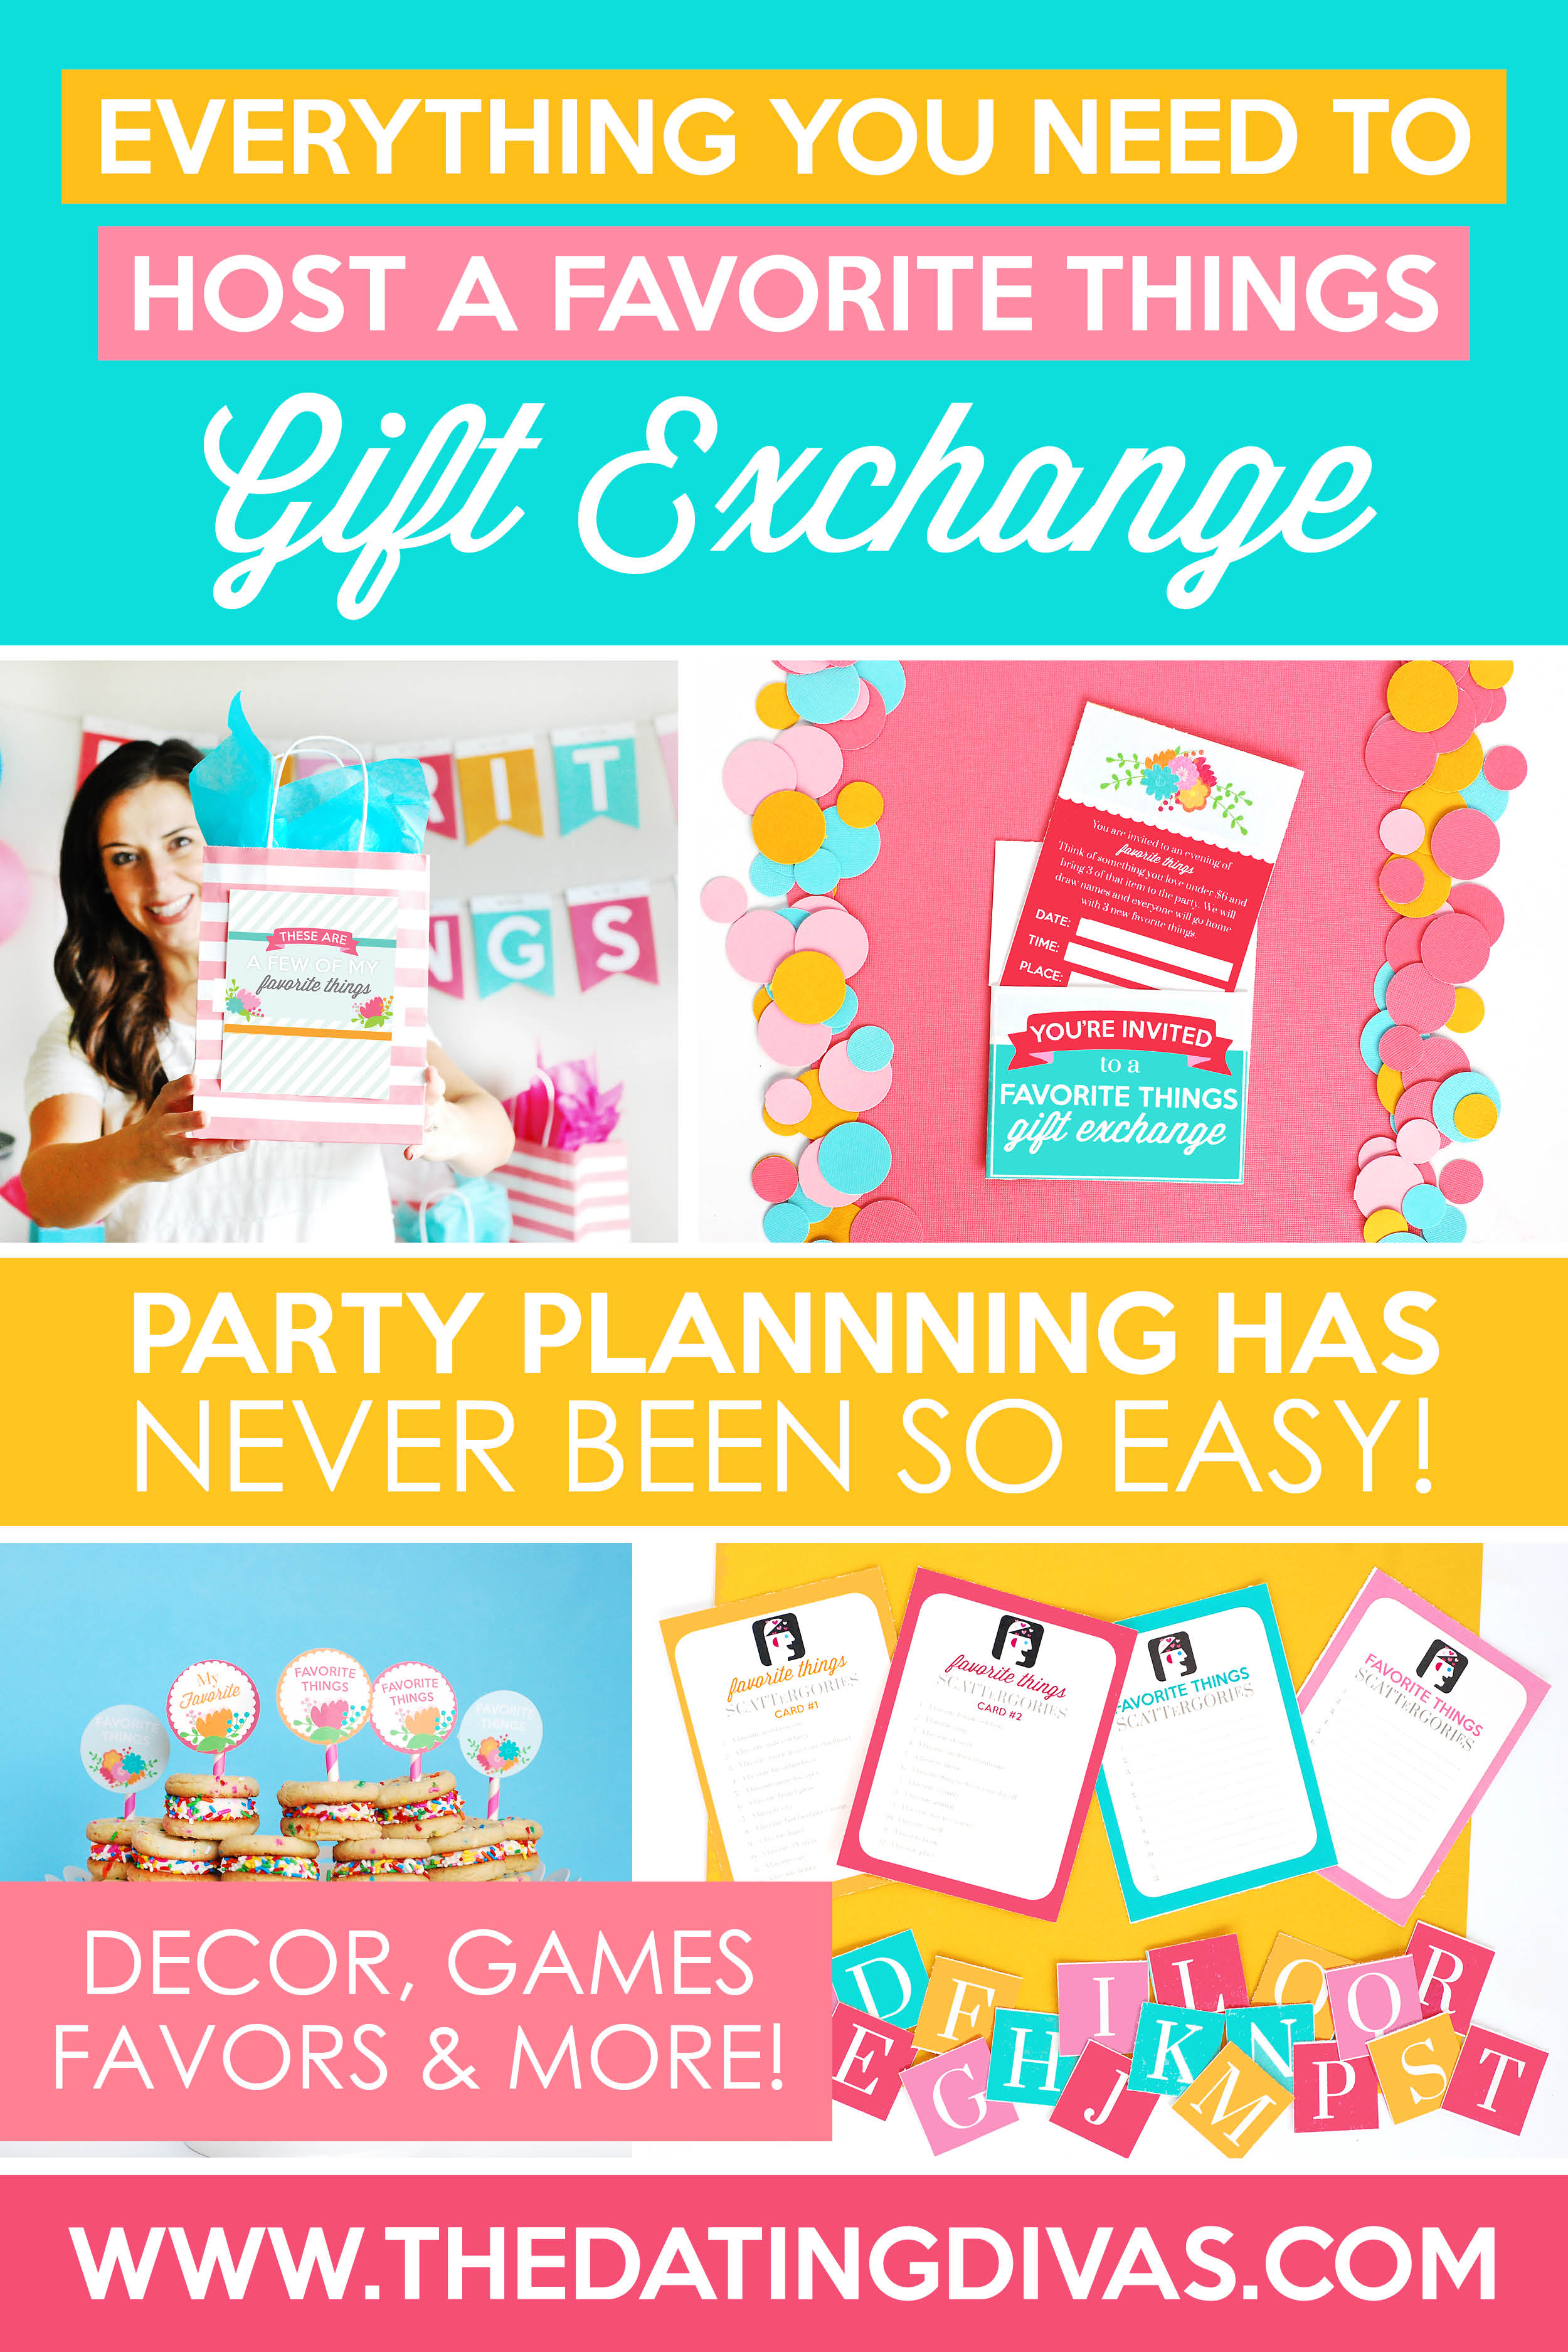 https://www.thedatingdivas.com/wp-content/uploads/2019/09/Everything-You-Need-to-Host-a-Favorite-Things-Gift-Exchange-Party.jpg